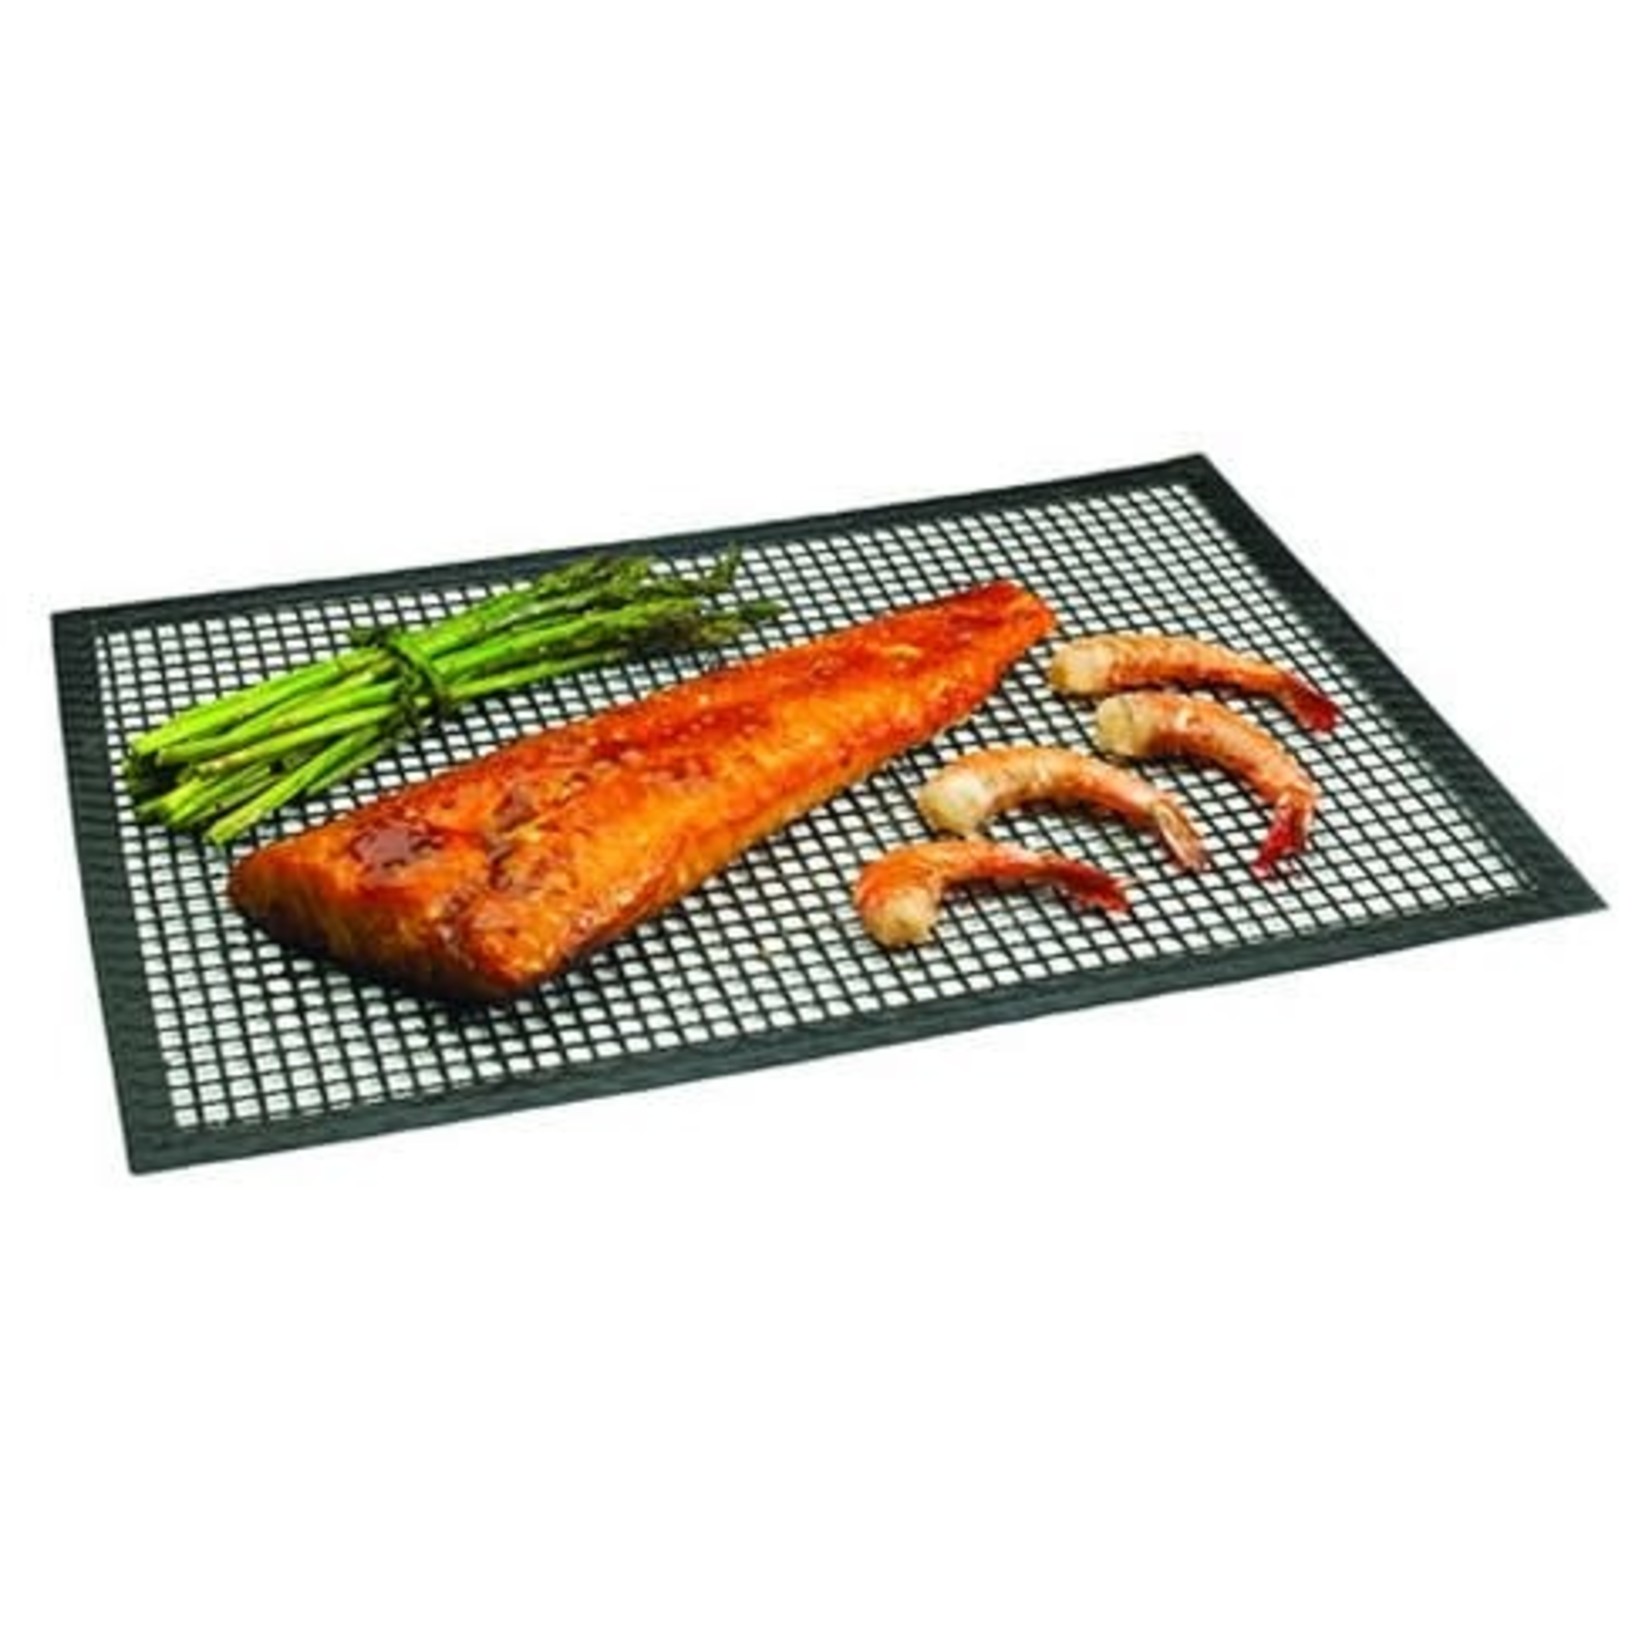 CHEF'S CHOICE CHEF'S PLANET Grill & Bbq Mat 15x10.5"